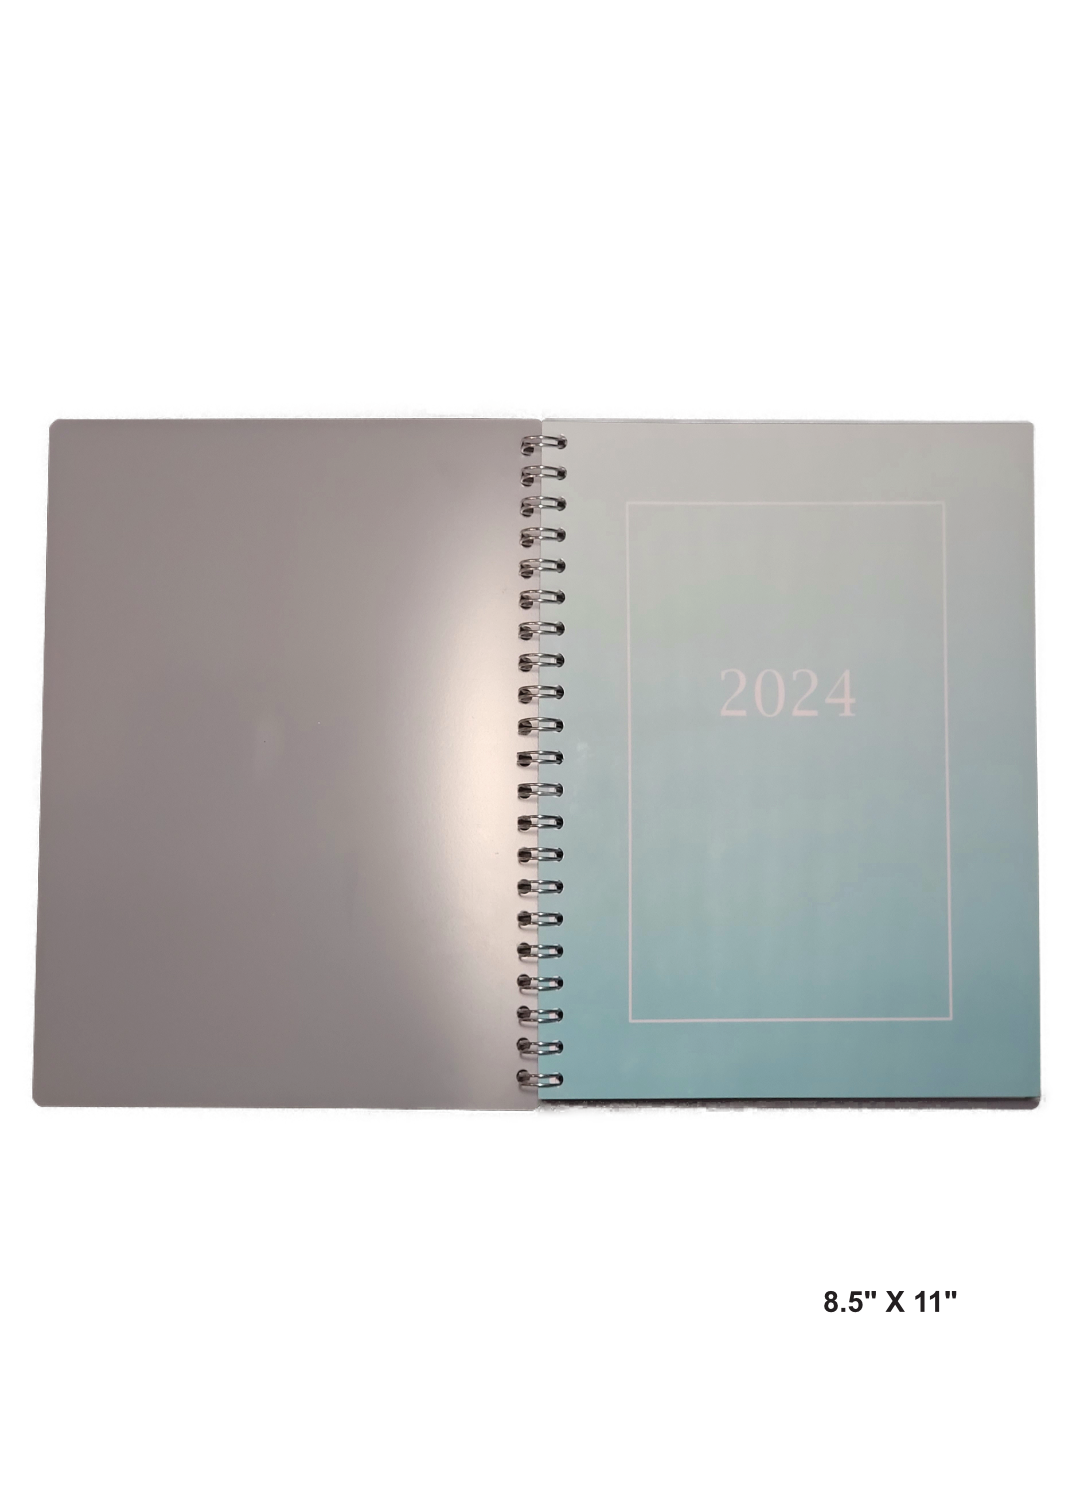 Image of a hand-made 8.5" x 11" 12 month planner with ombre teal color. Great for planning and organization.